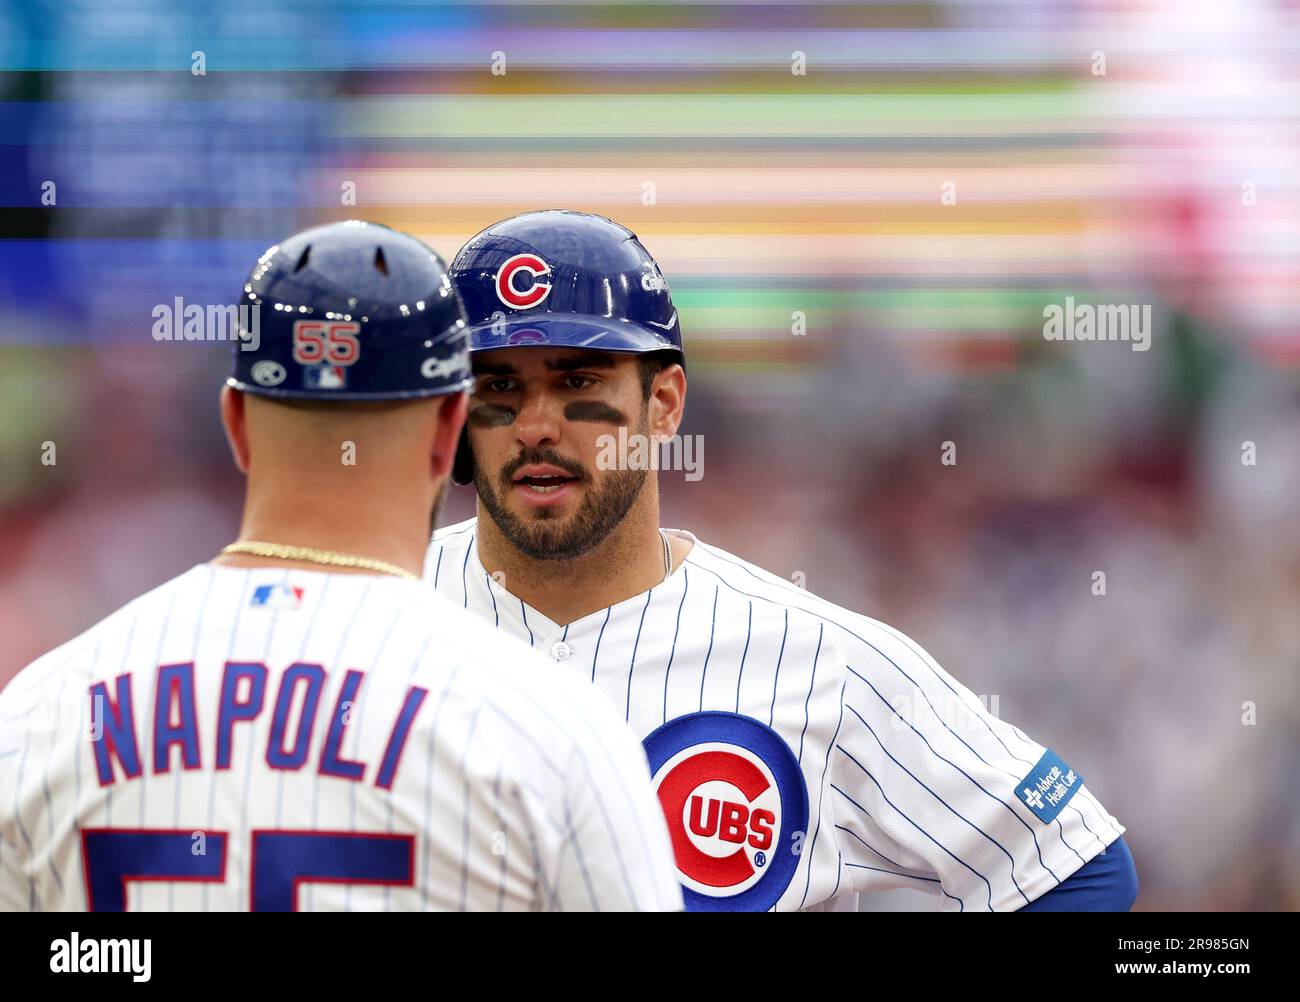 Mike Napoli 2013 Photos and Premium High Res Pictures - Getty Images